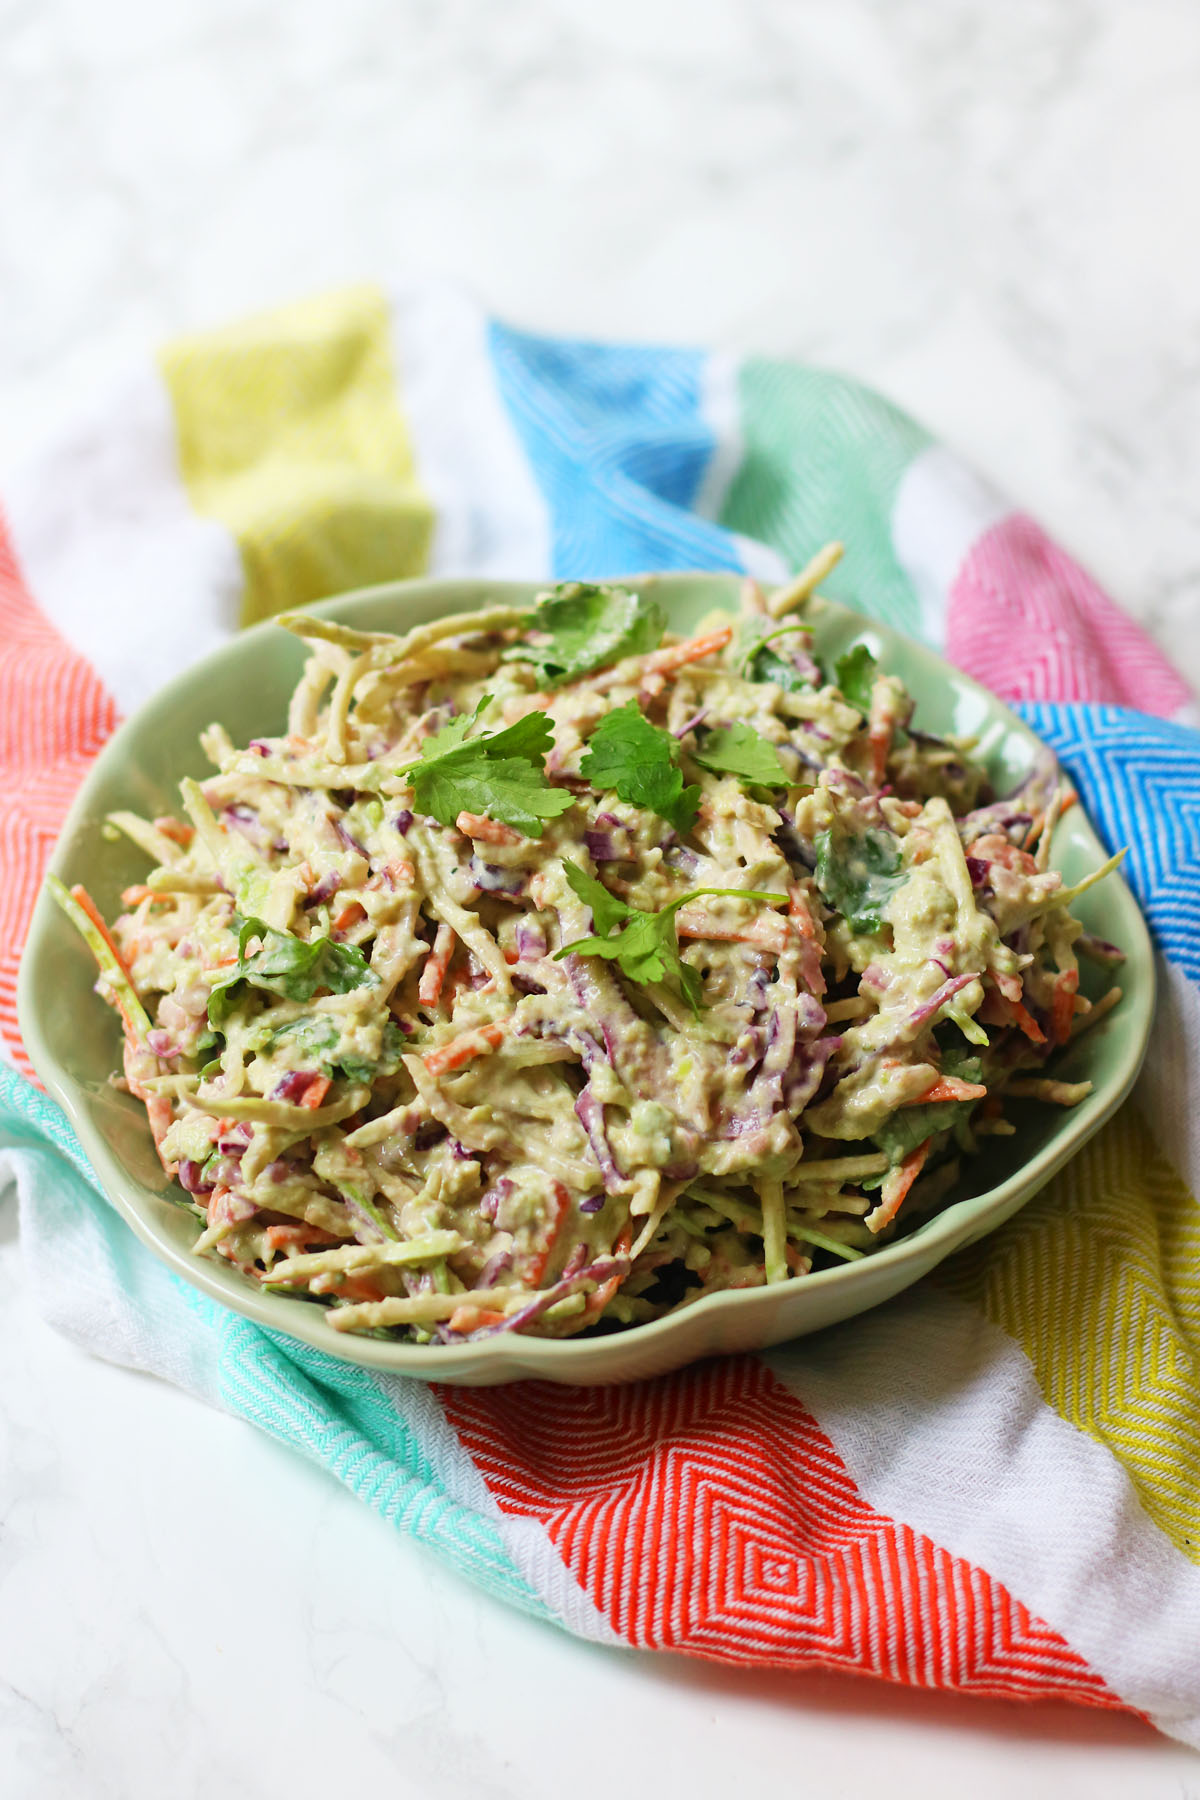 Mexican slaw made with carrot, coriander, red and white cabbage